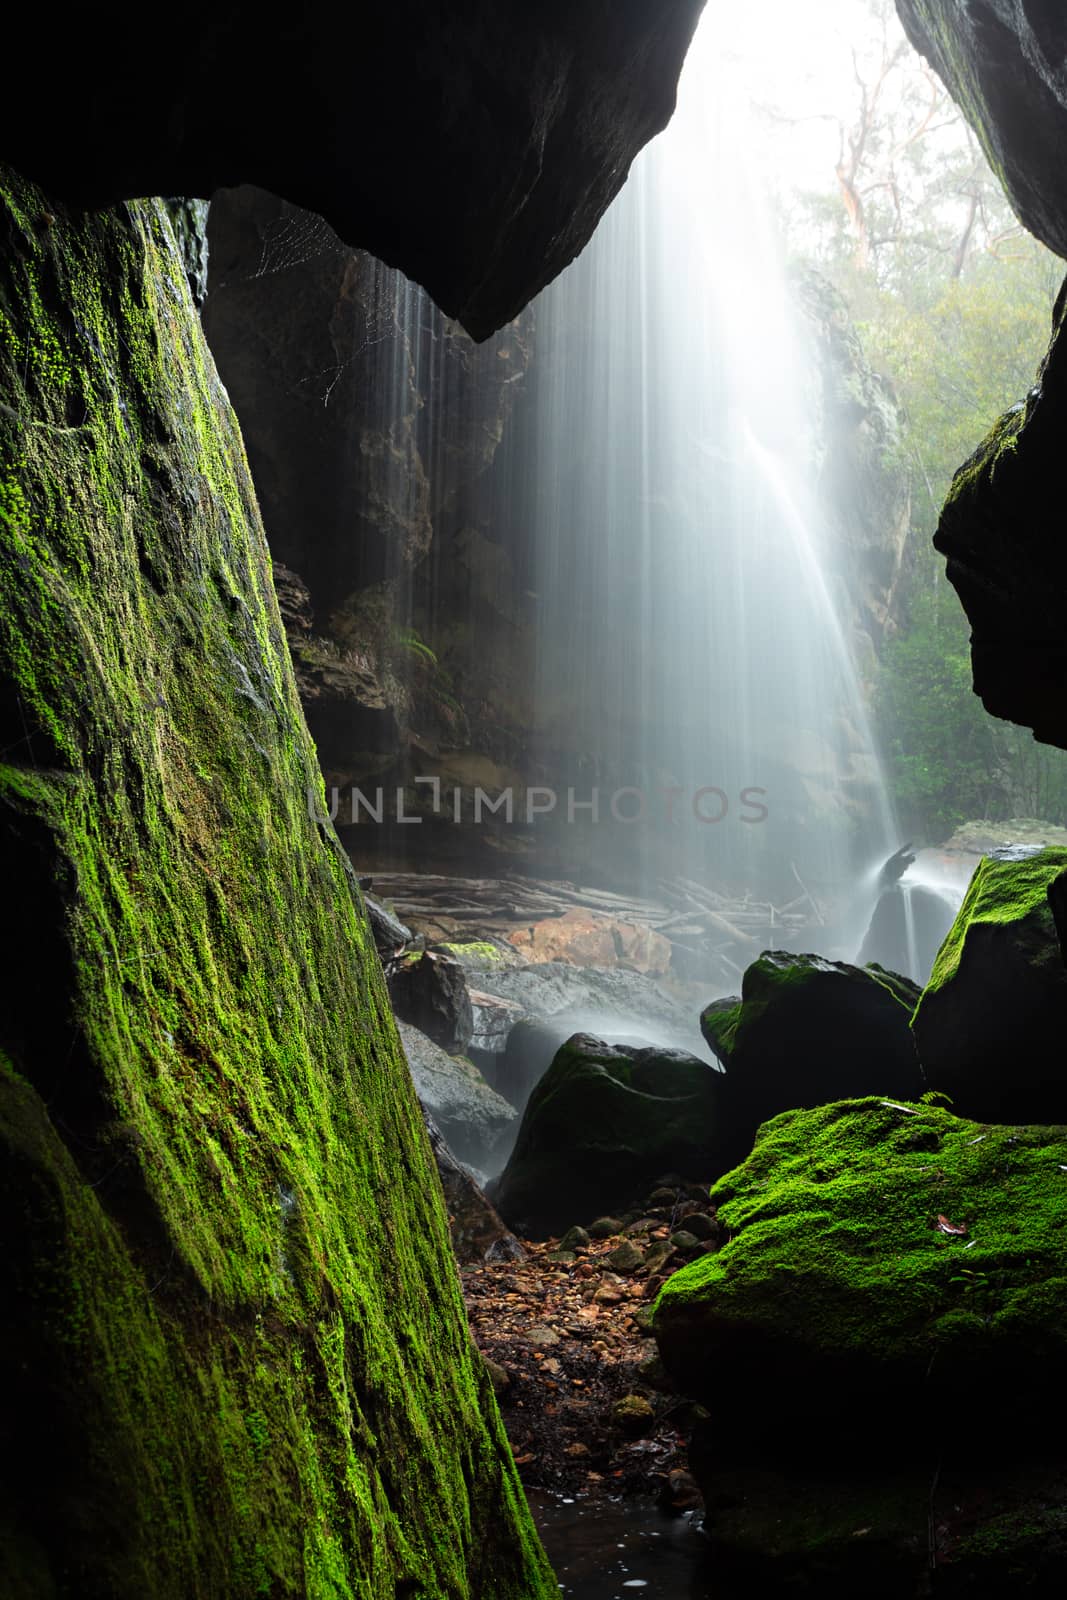 Forty foot falls seen through the narrow cave by lovleah